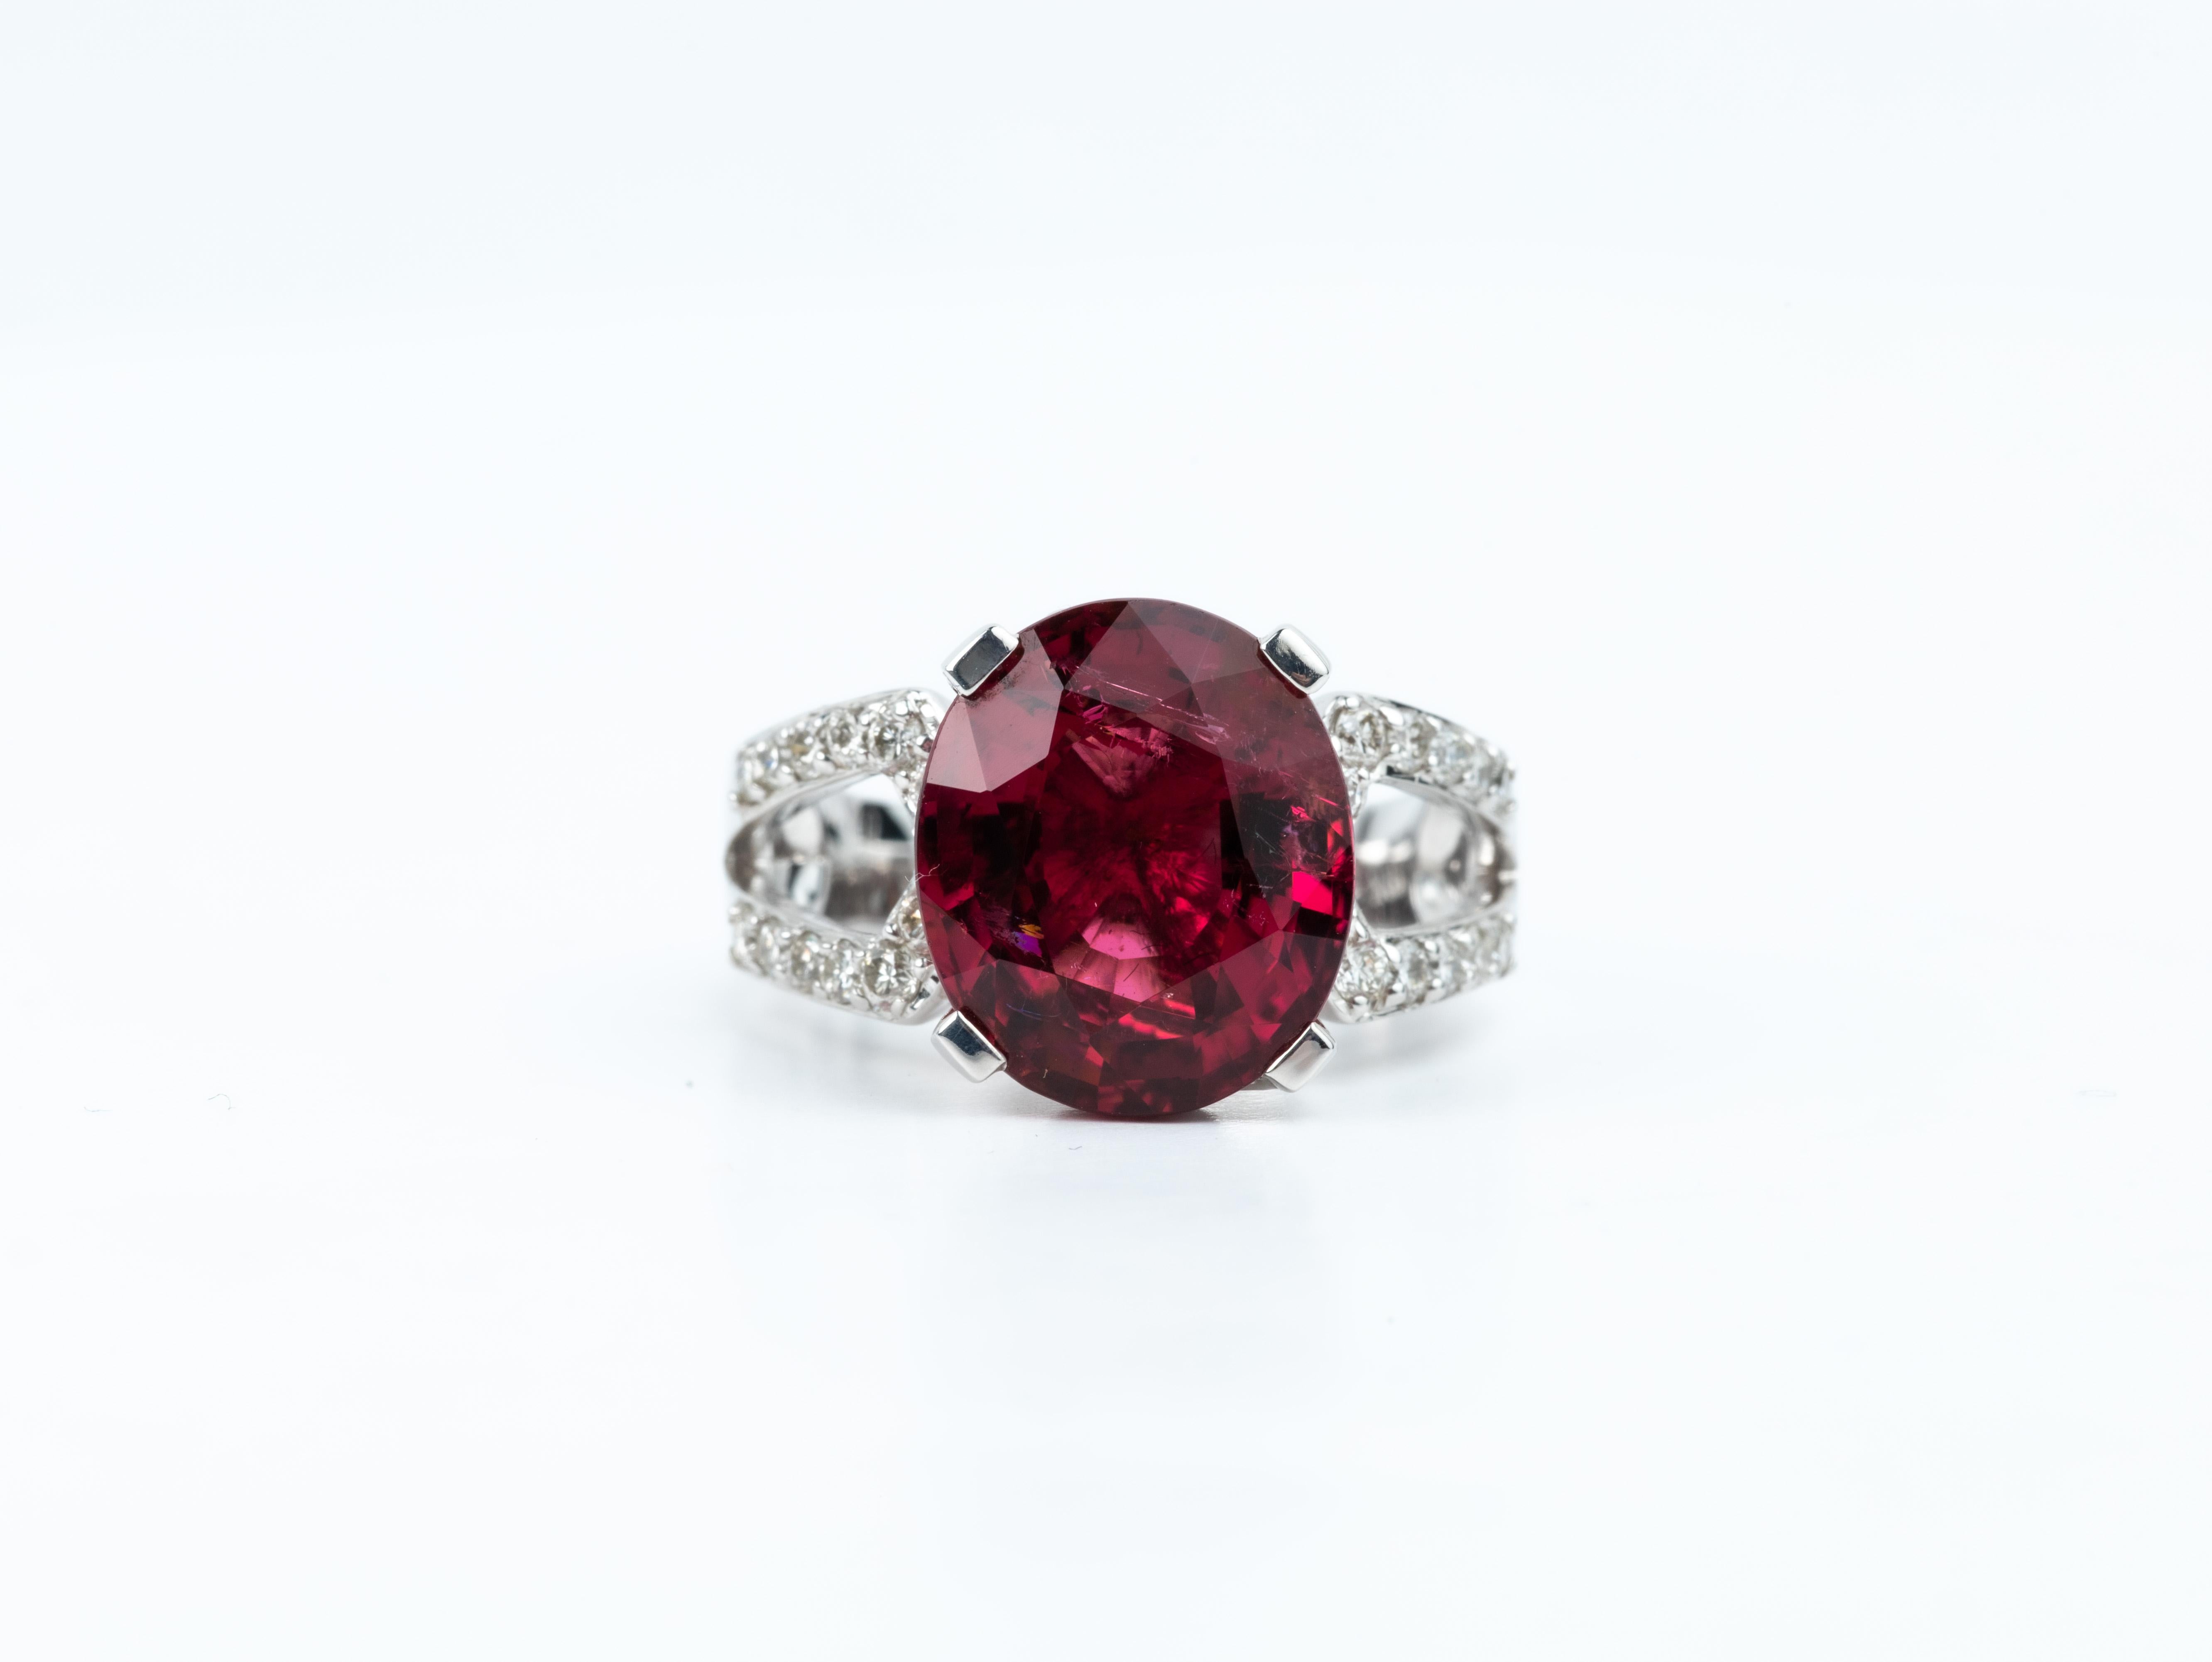 8 Carat Oval Cut Rubellite Tourmaline with 1 Ct Diamonds Cocktail Ring 18k White In Excellent Condition For Sale In Jaipur, RJ